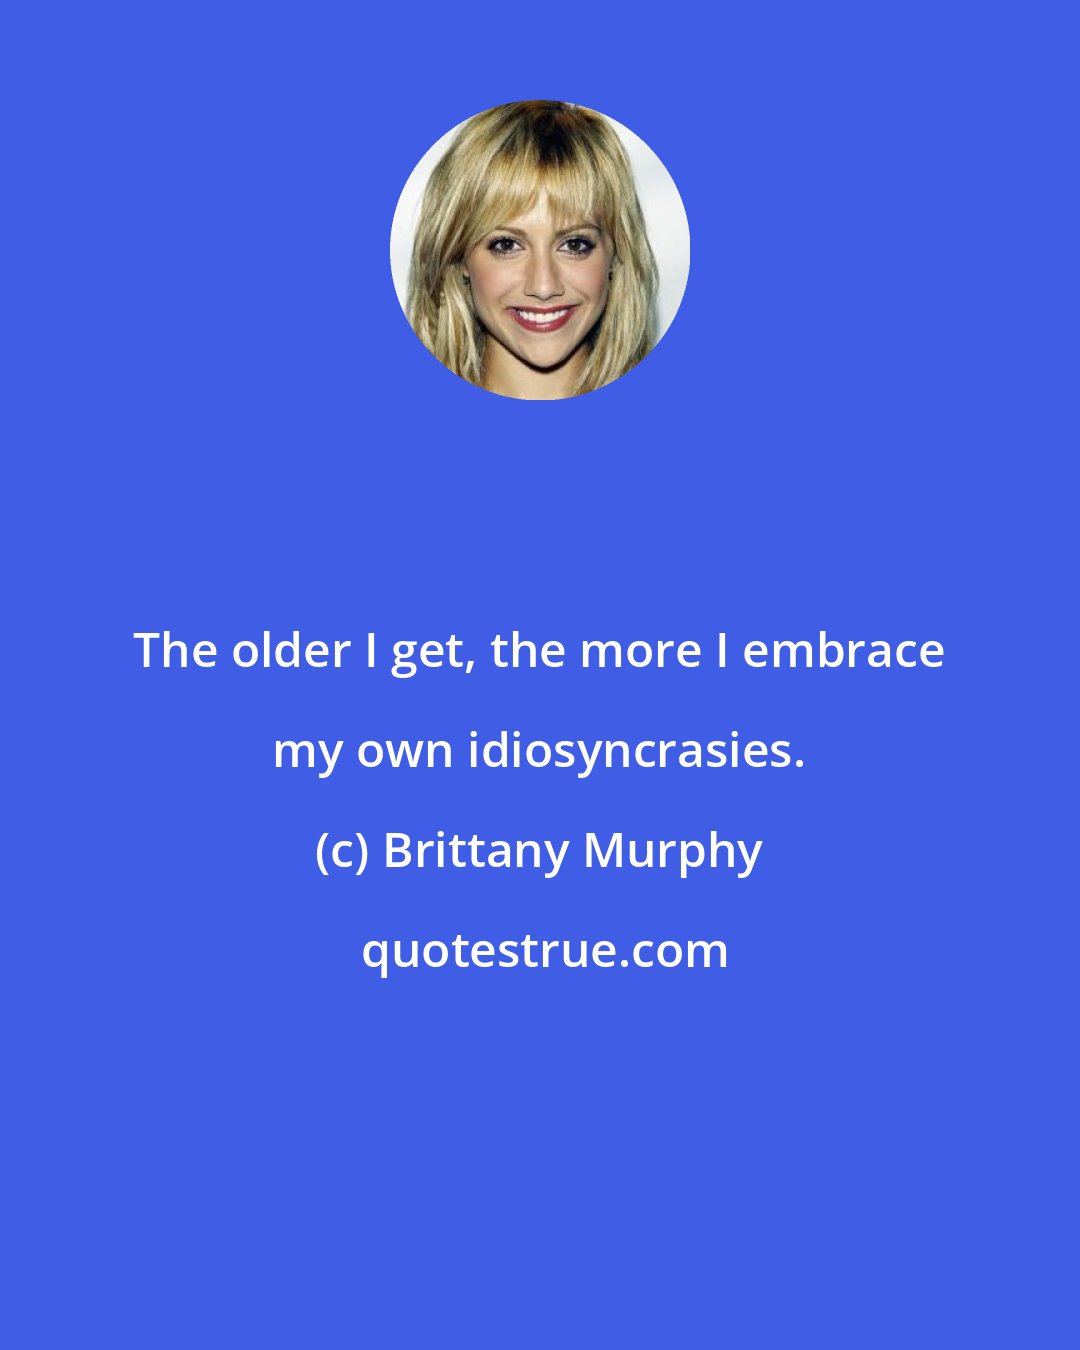 Brittany Murphy: The older I get, the more I embrace my own idiosyncrasies.